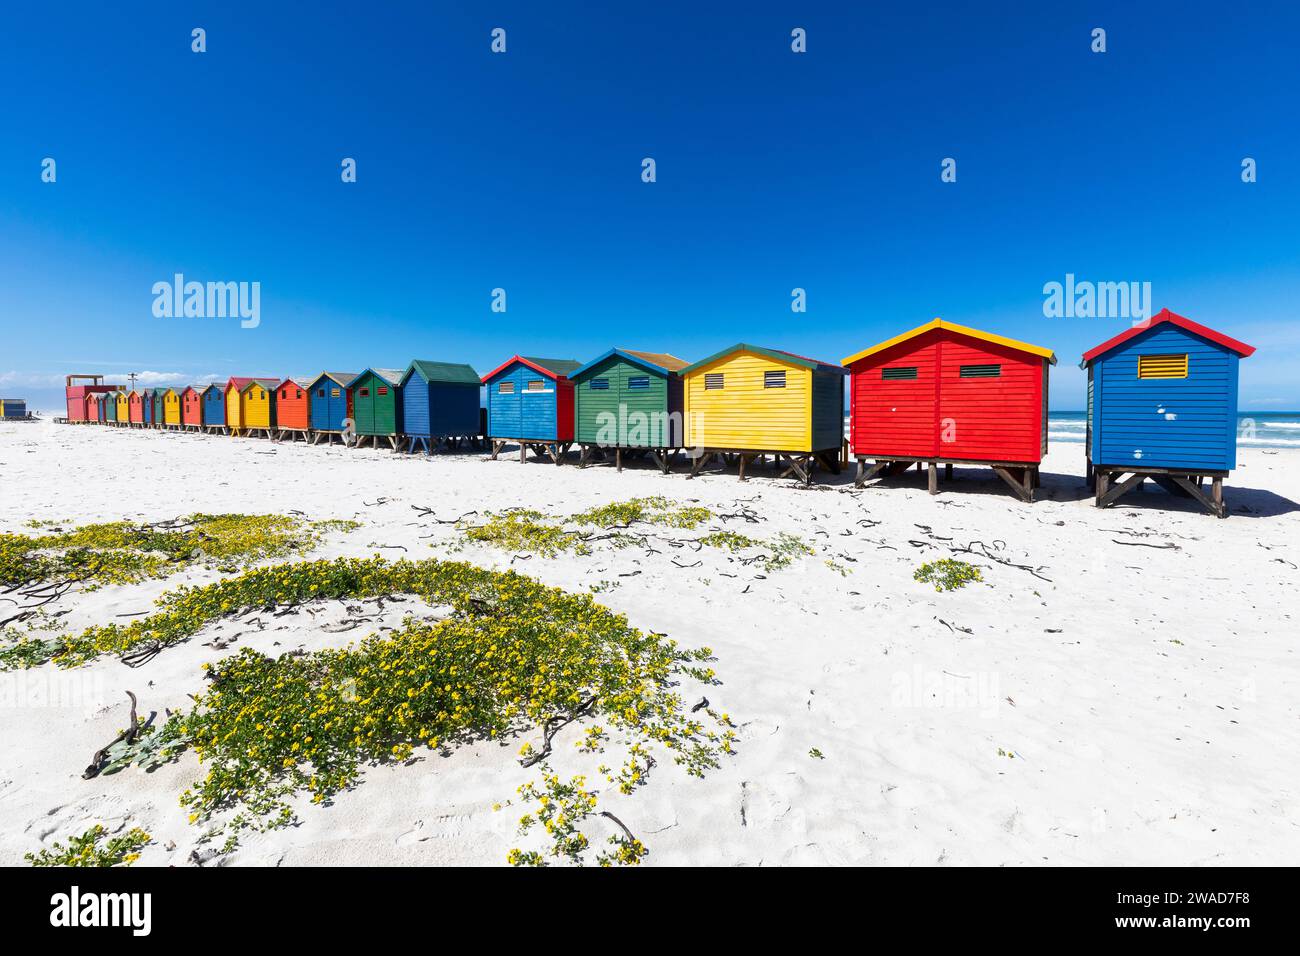 South Africa, Muizenberg, Row of colorful beach huts on Muizenberg Beach Stock Photo